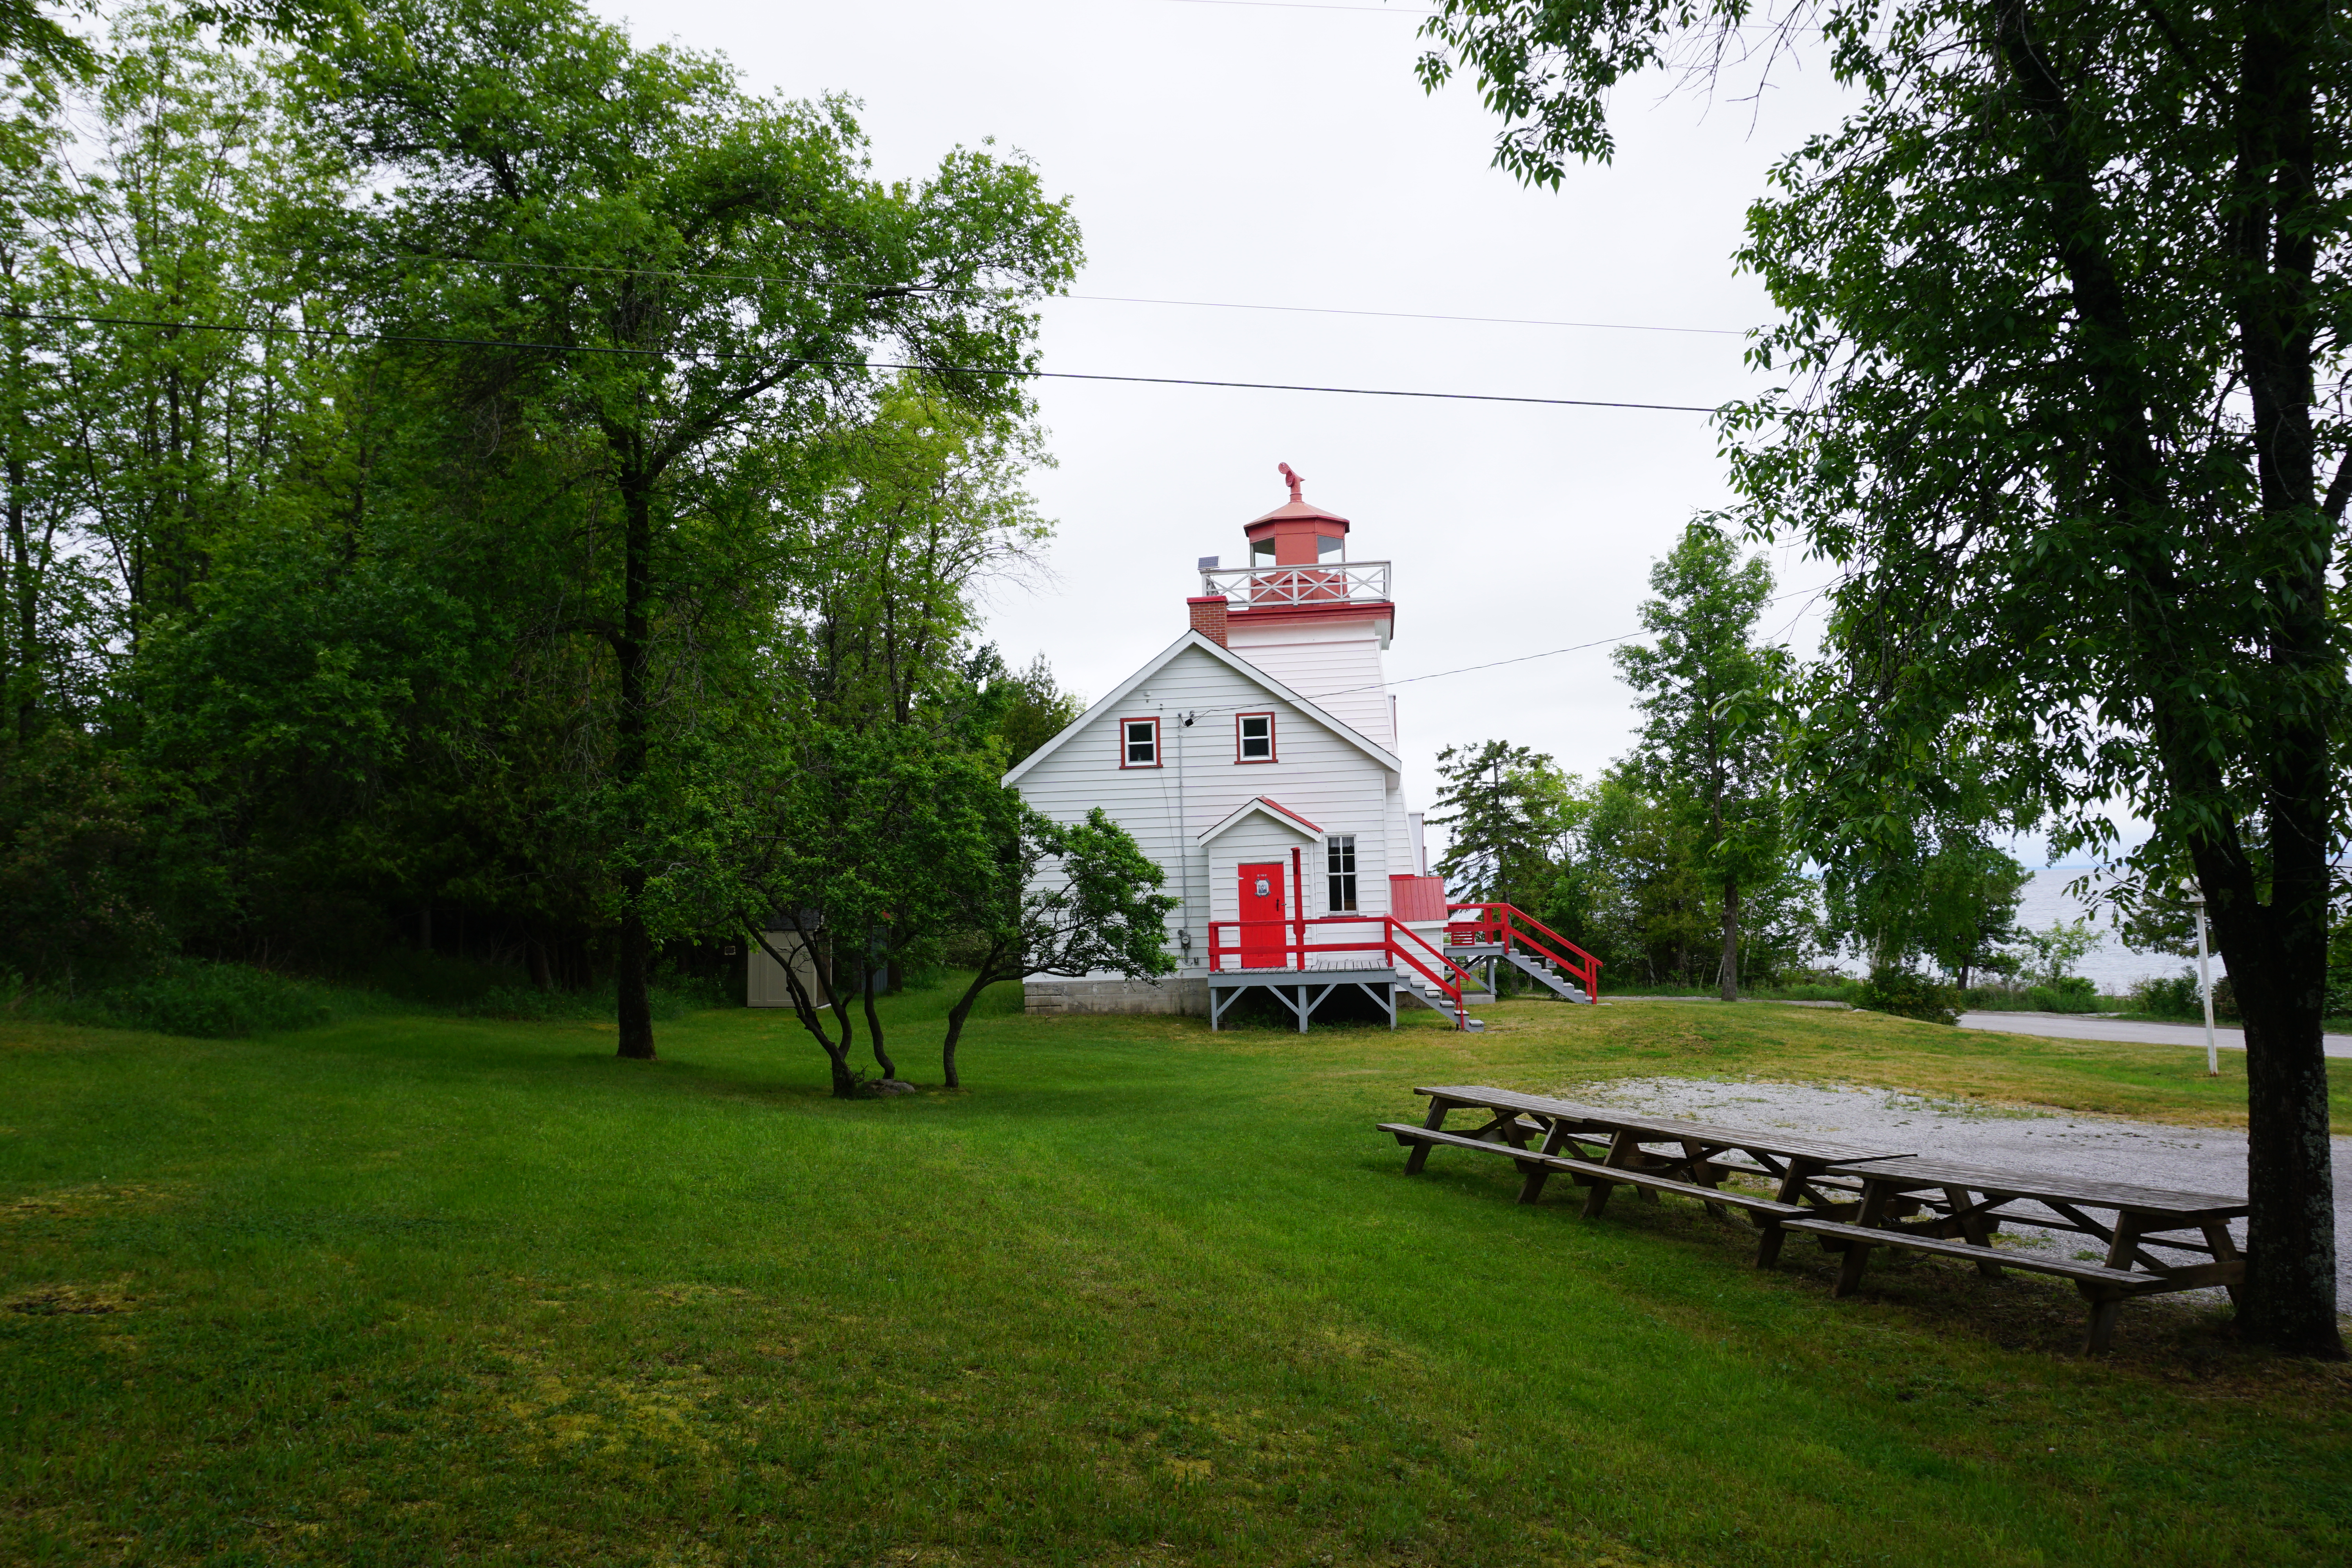 The Jant Head Lighthouse; a short red and white lighthouse on the edge of Gore Bay, surrounded in green grass and trees.